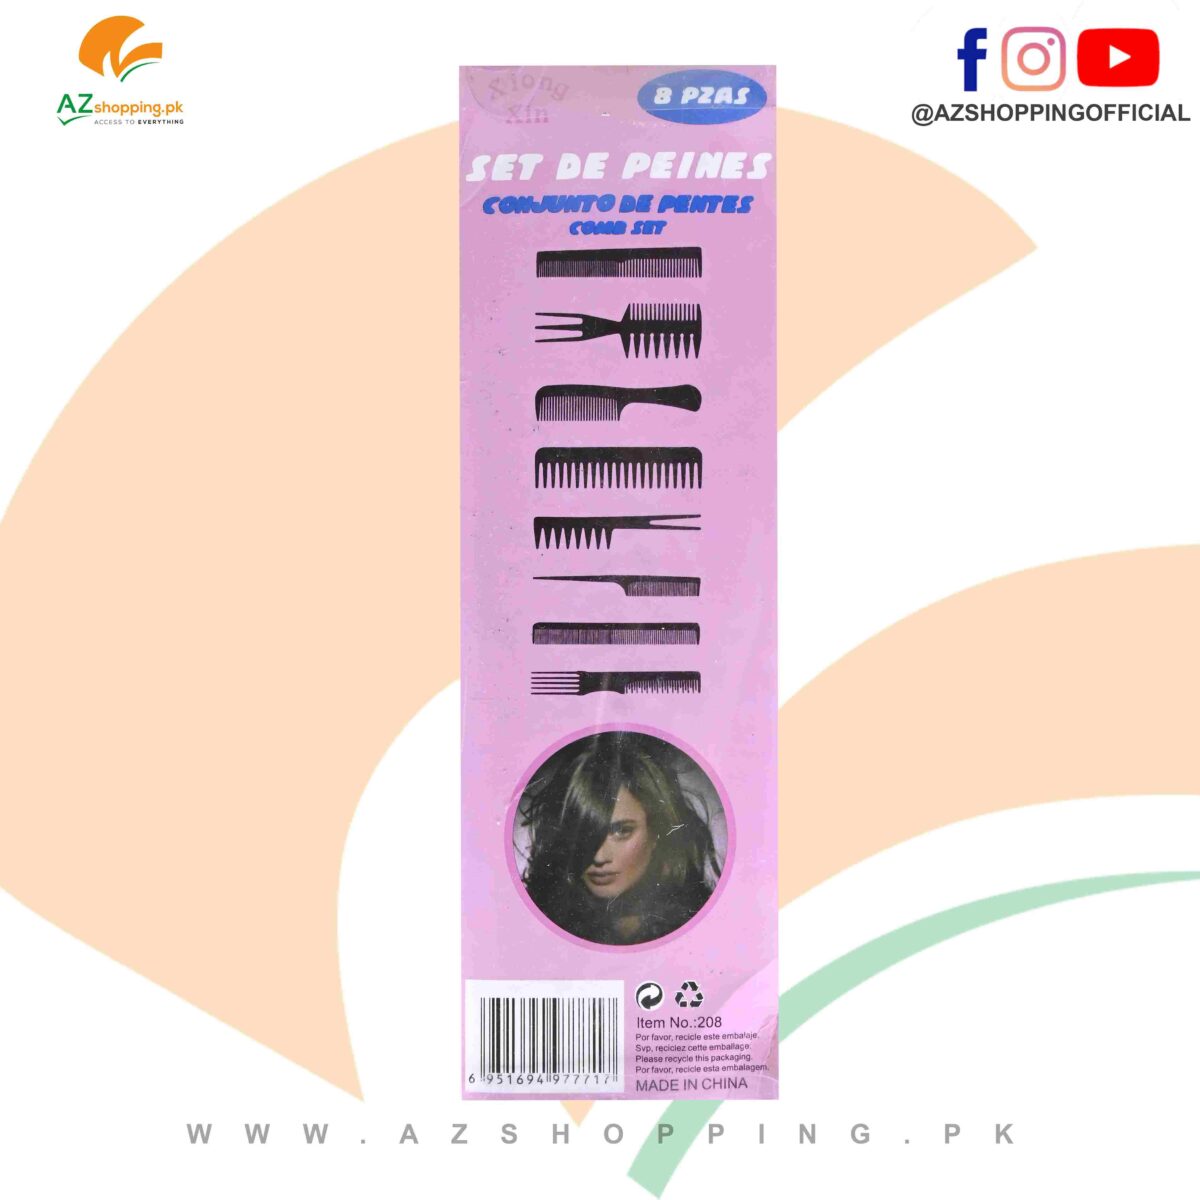 All in one Complete Professional Hair Styling Comb set - Item No: 208